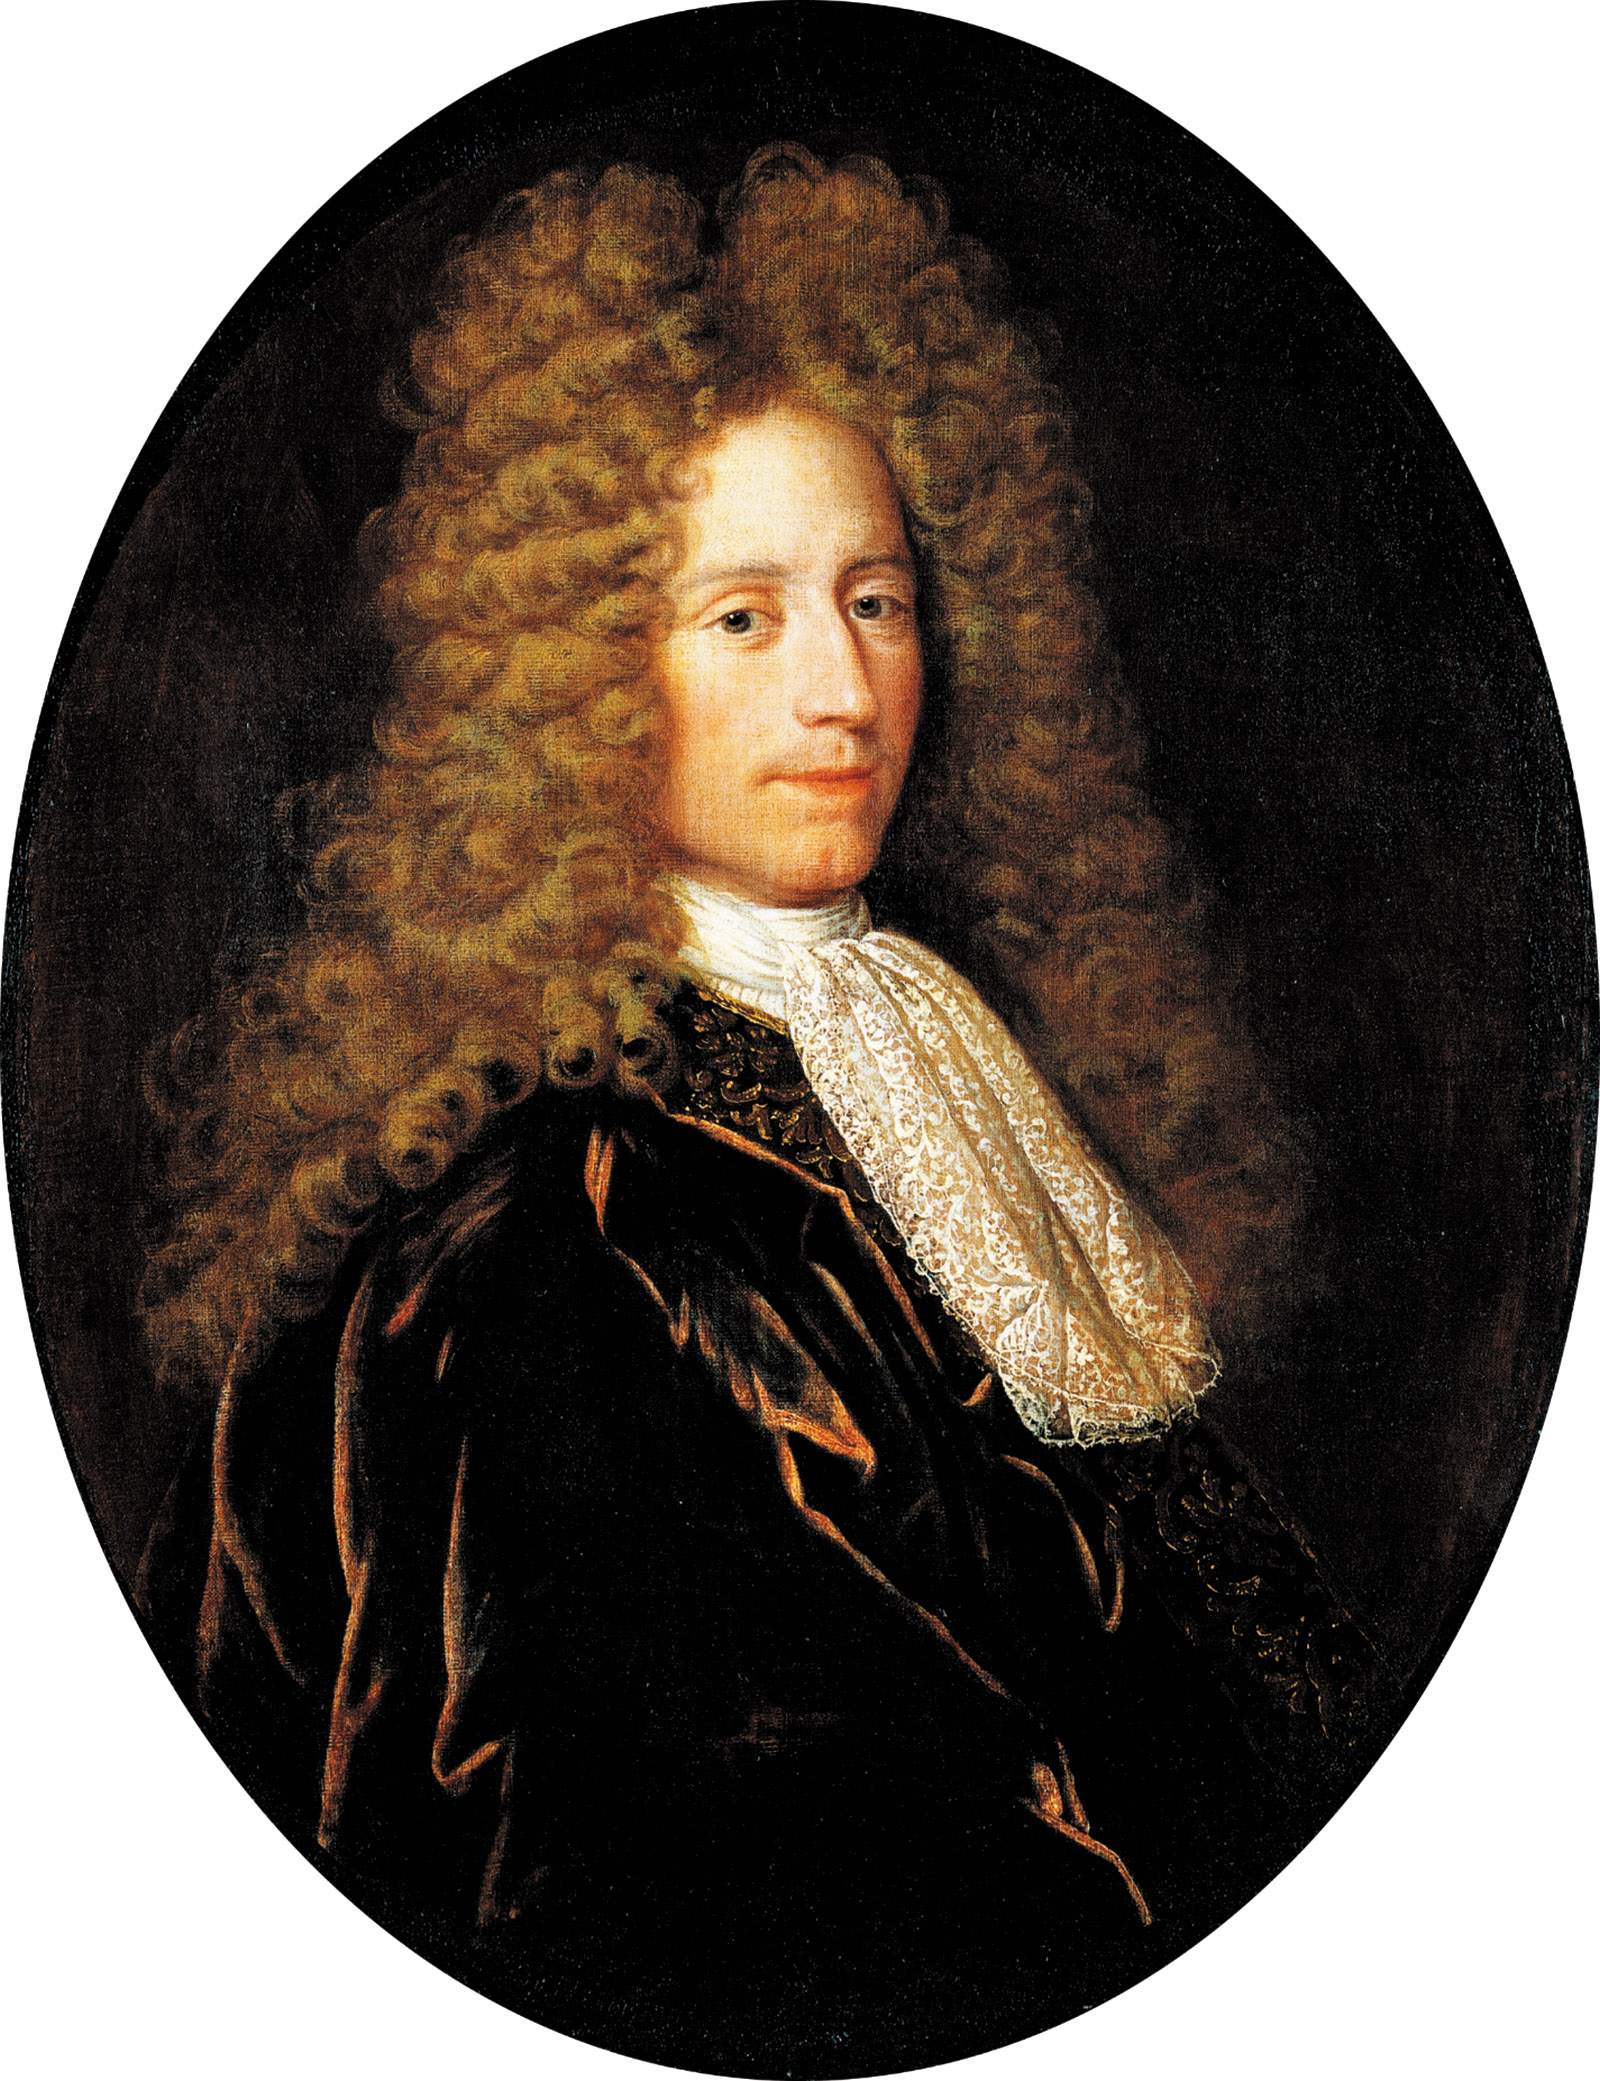 Painting of John Law by Alexis Simon Belle, circa 1715–1720